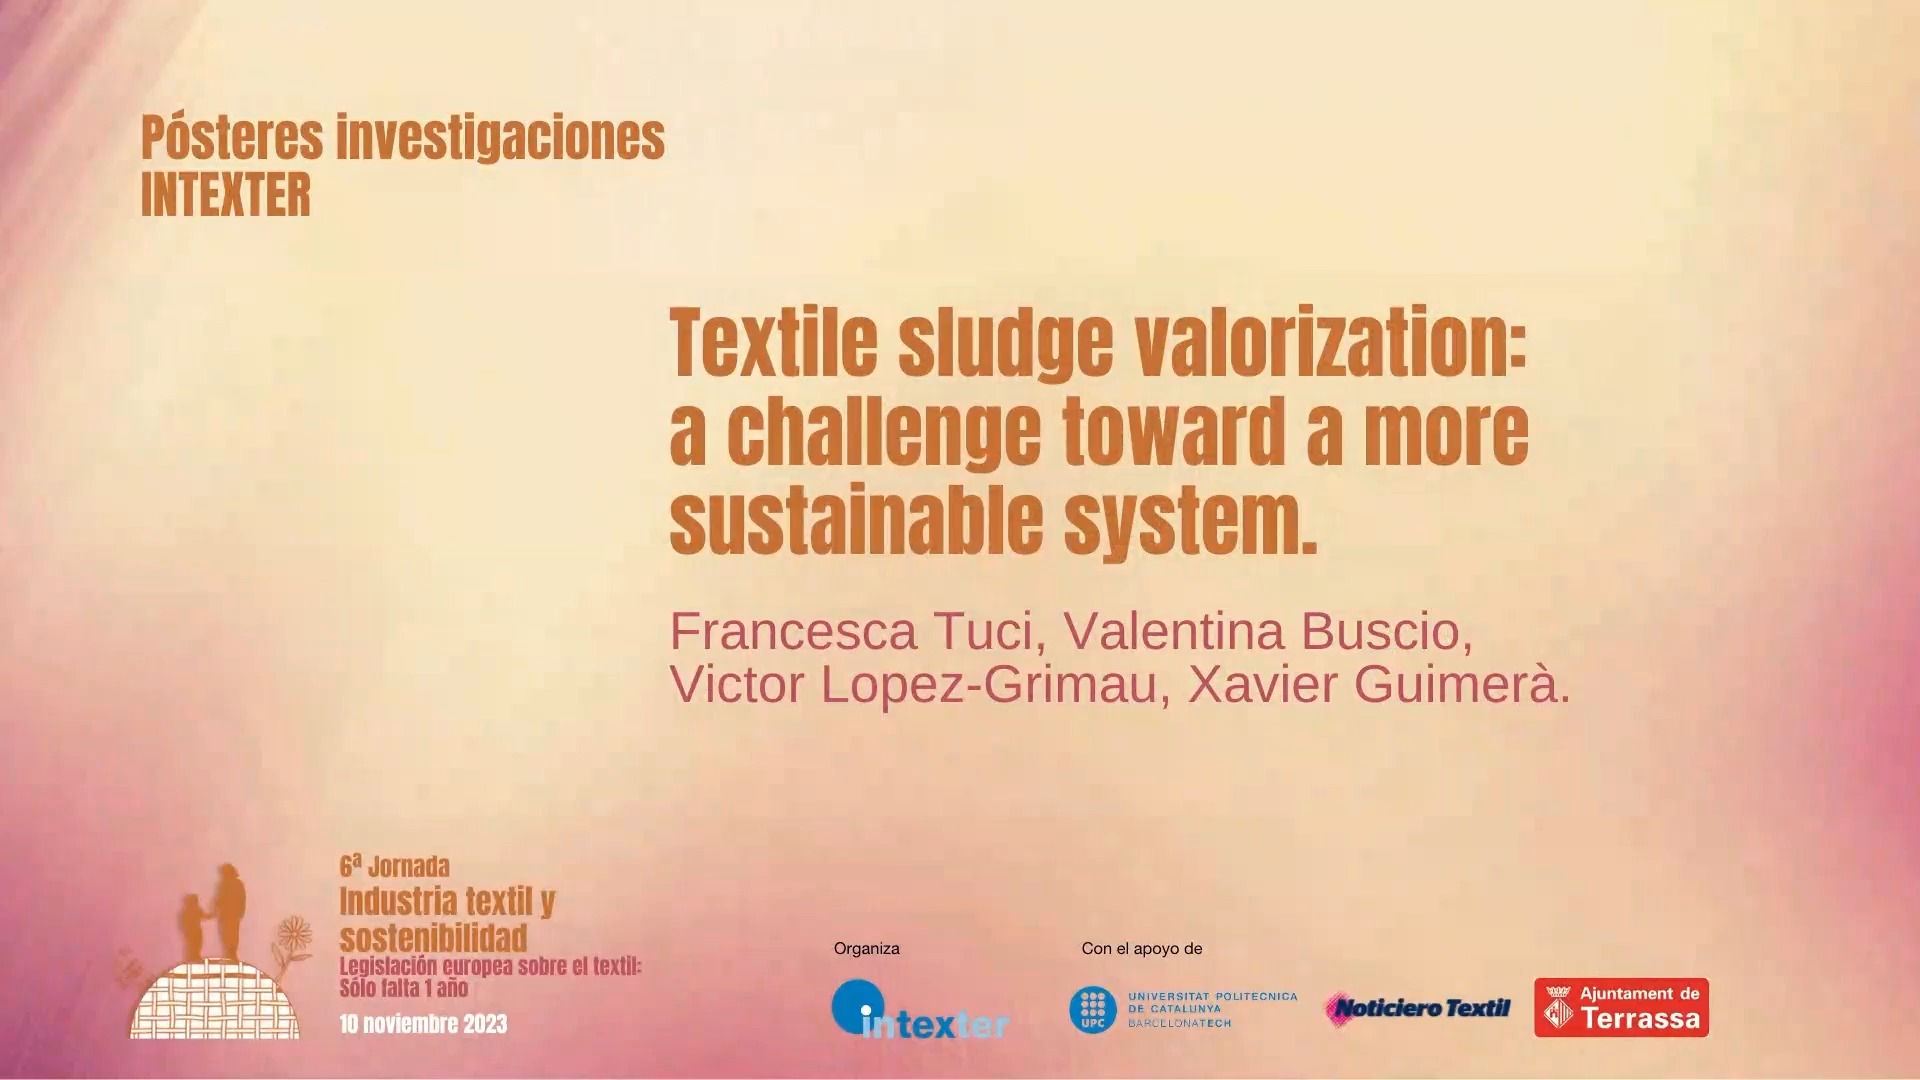 Textile sludge valorization: a challenge toward a more sustainable system